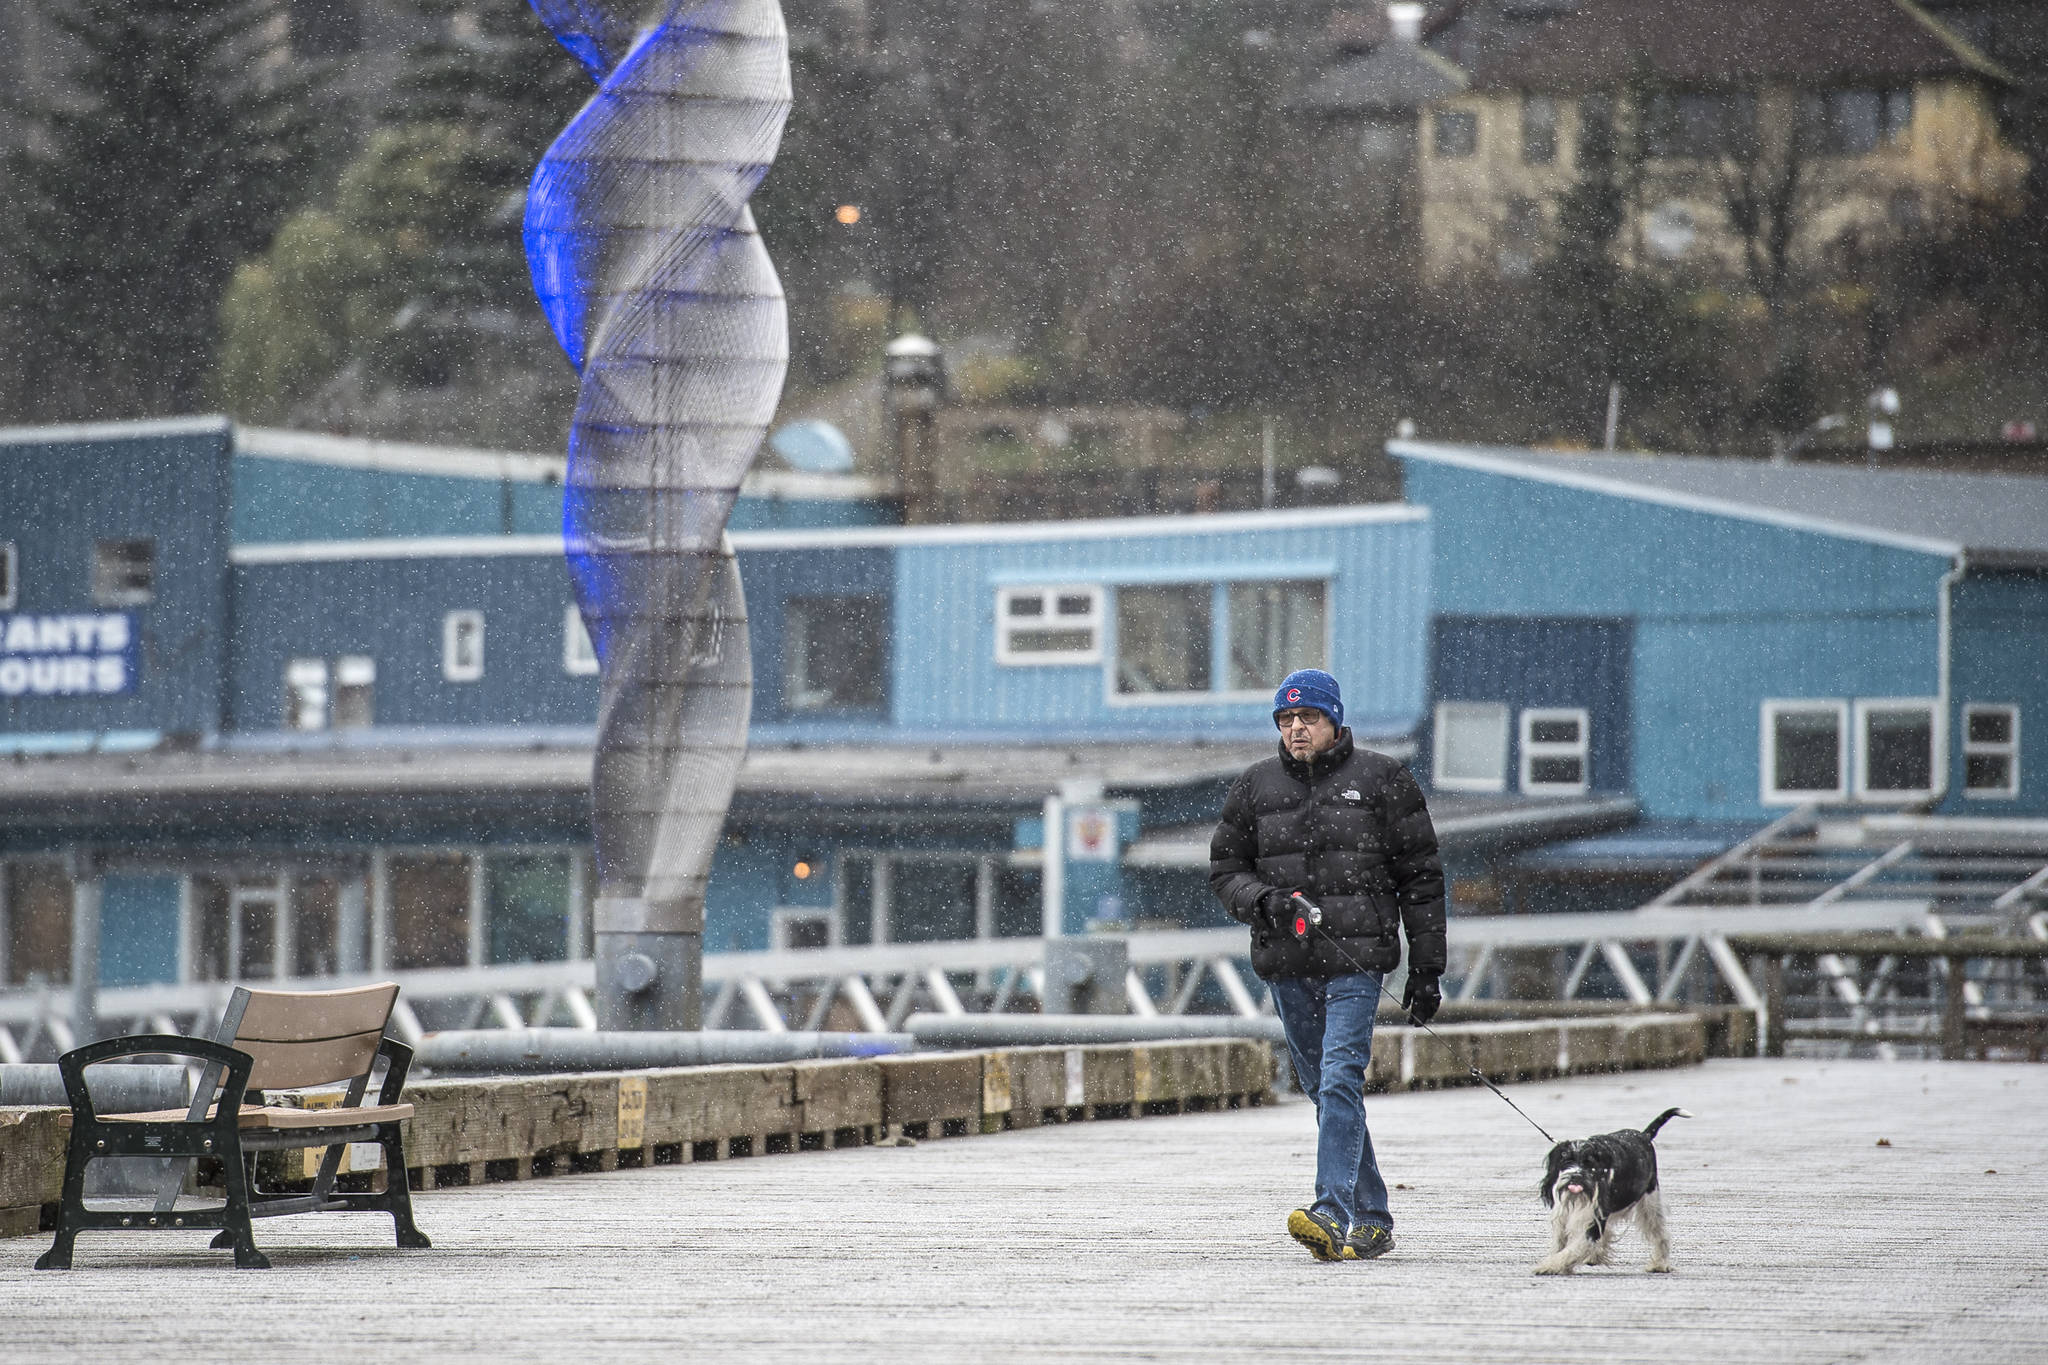 Paul Neal walks his dog, Taku, along the downtown waterfront during the first snow of 2018 on Thursday, Nov. 1, 2018. Snow could possibly fall this week, but a meteorologist said it doesn’t seem likely. (Michael Penn | Juneau Empire)